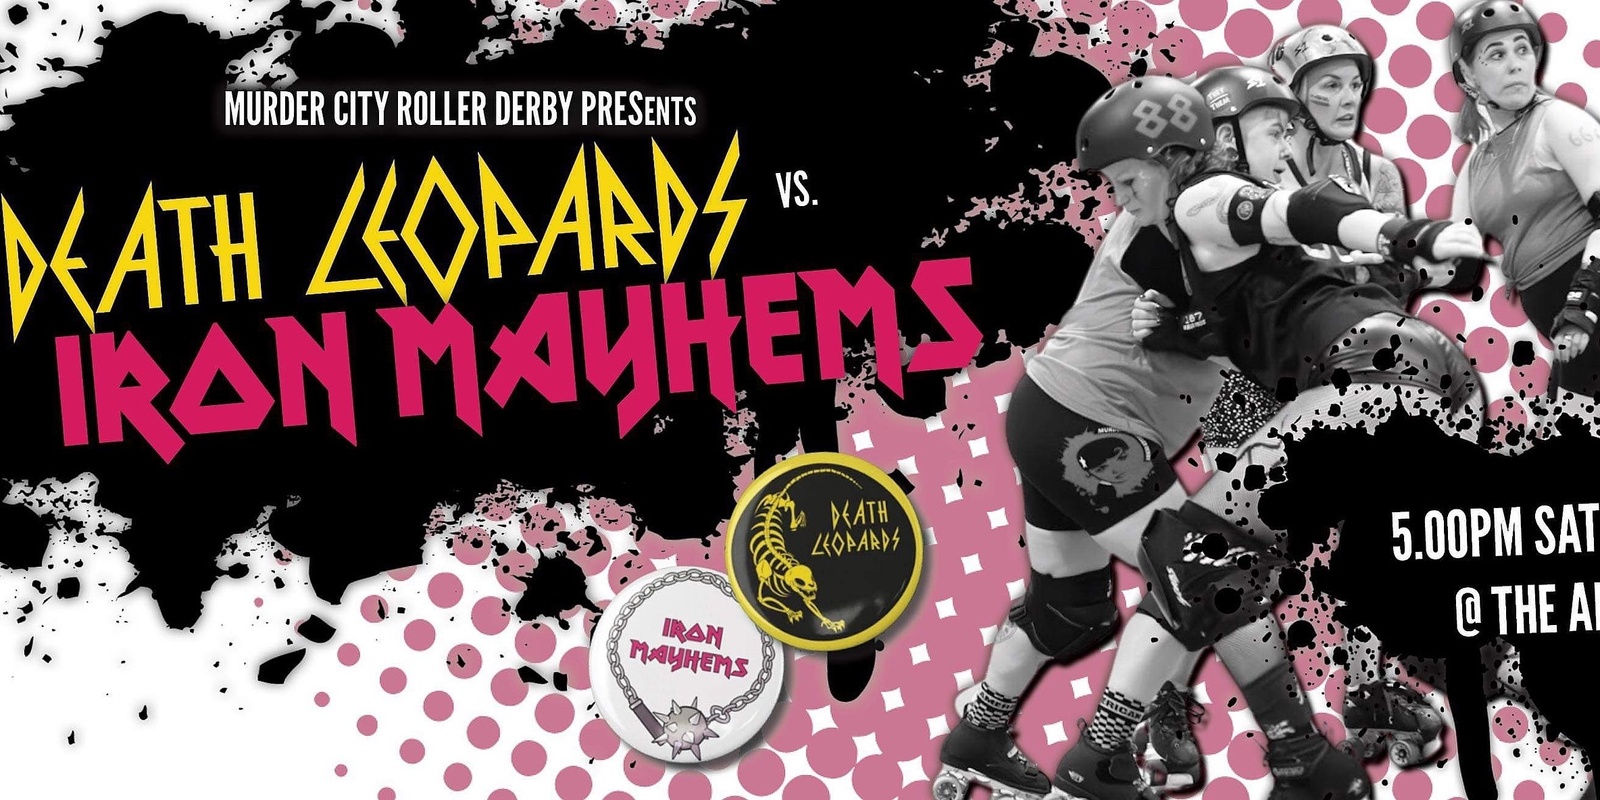 Banner image for MCRD Bout 1 - Death Leopards VS Iron Mayhems